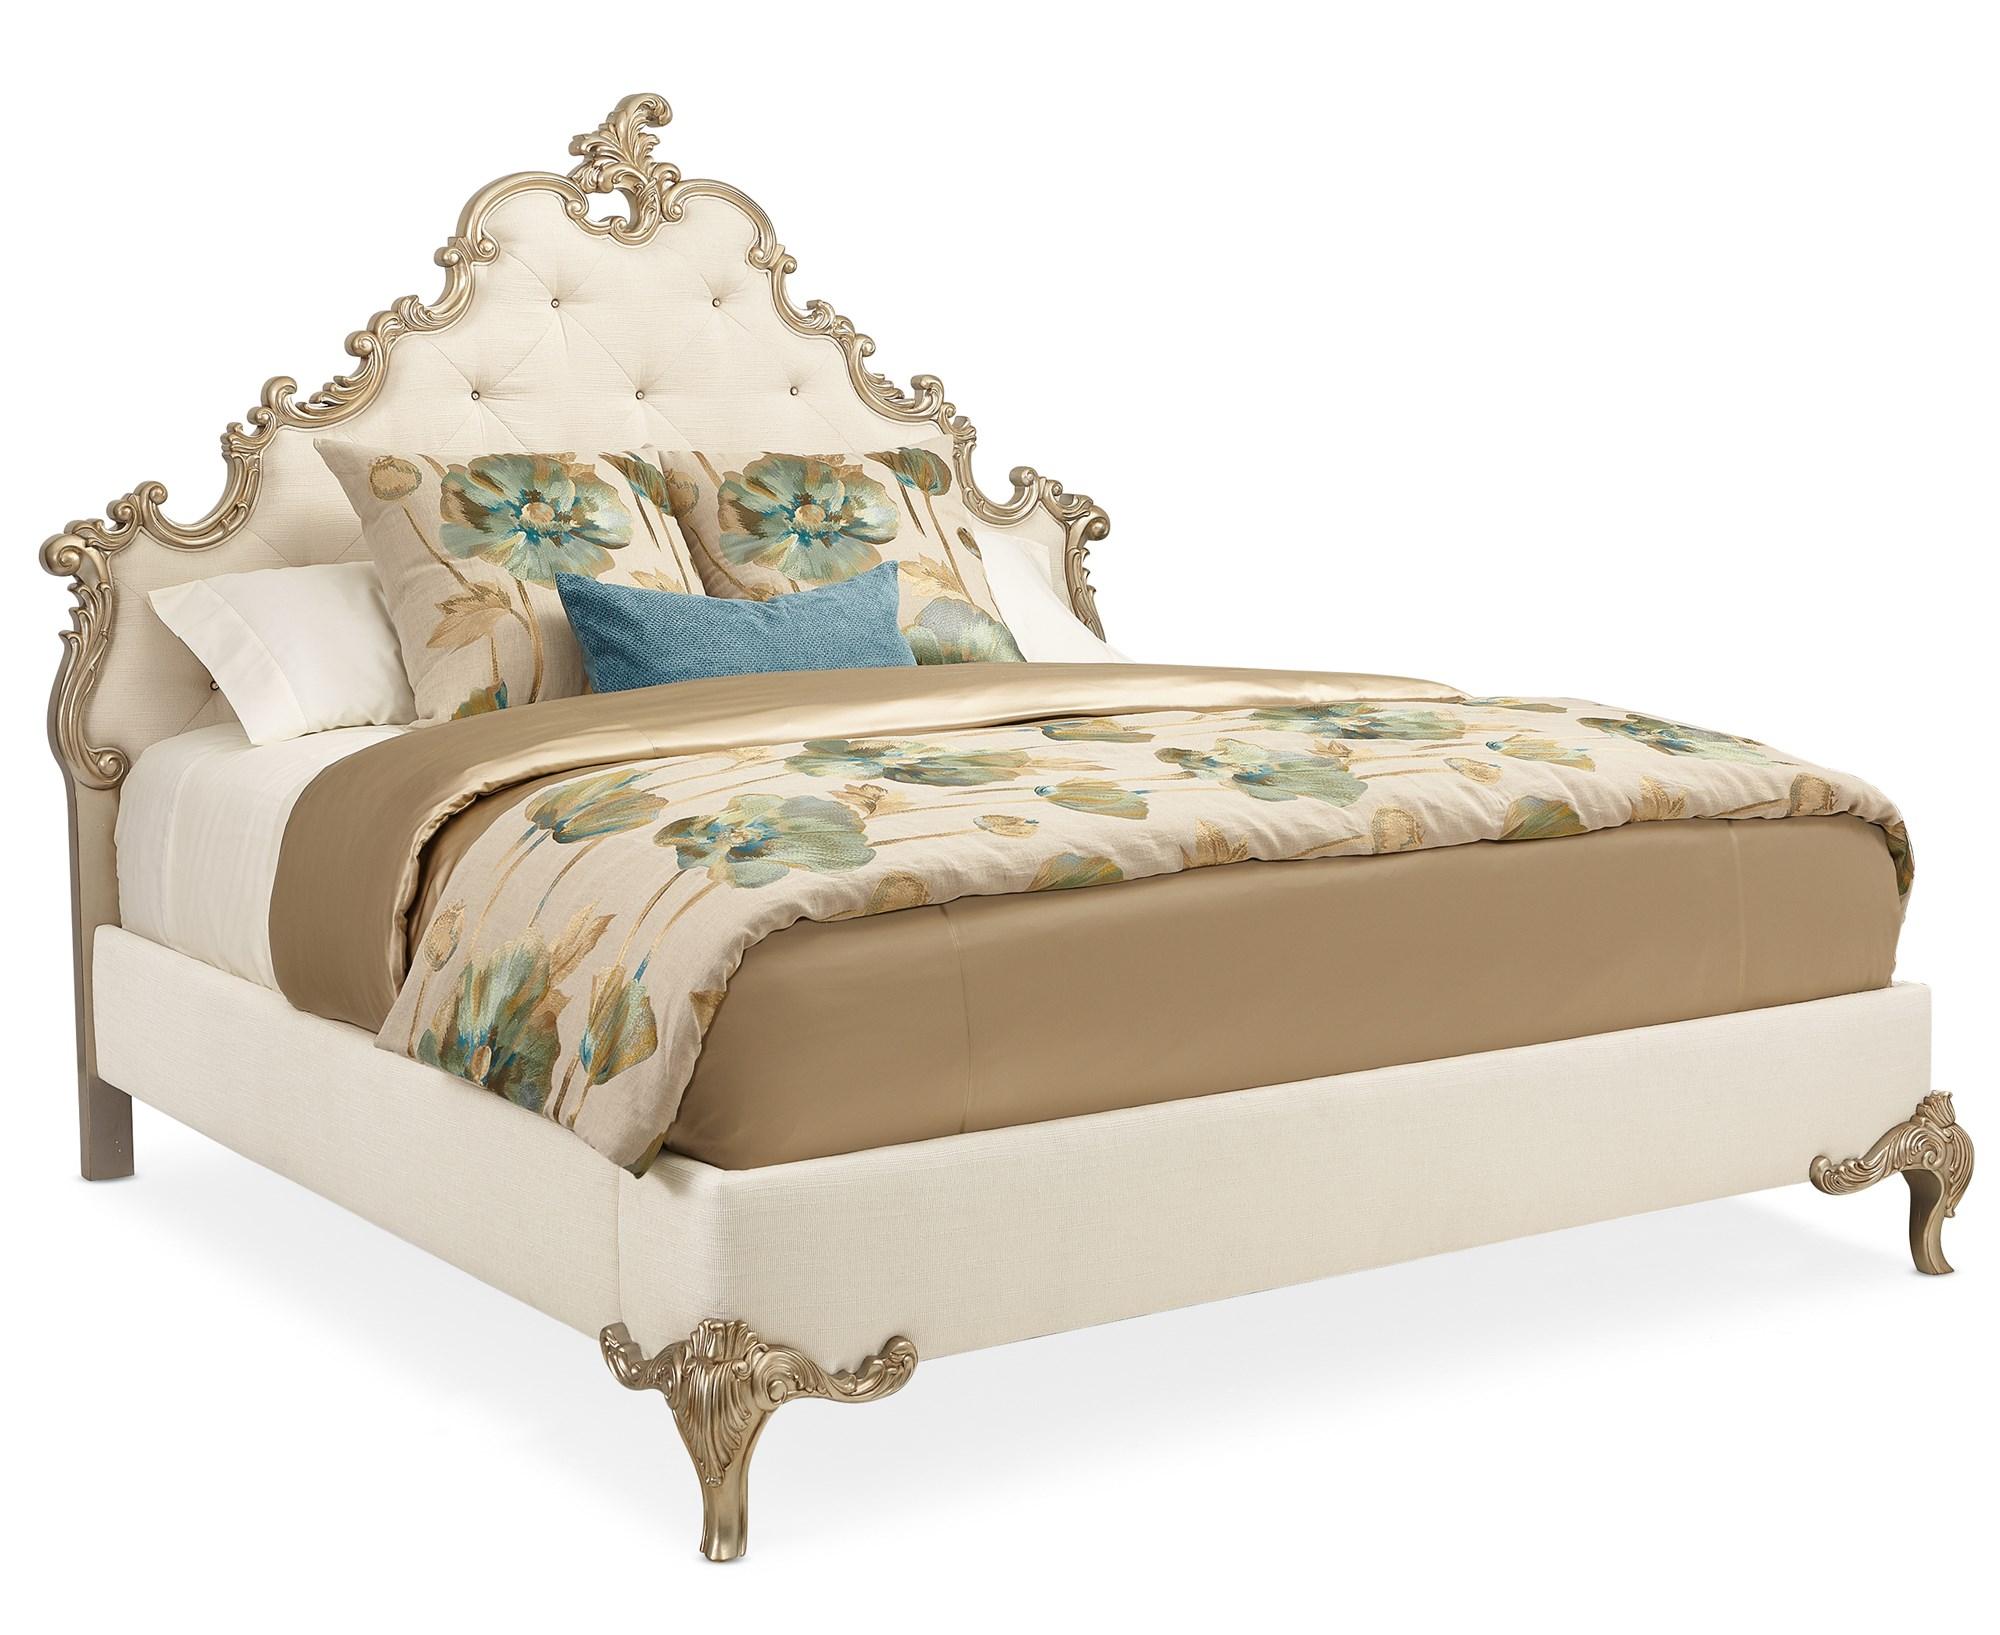 Traditional Panel Bed FONTAINEBLEAU C063-419-101 in Cream, Gold Fabric